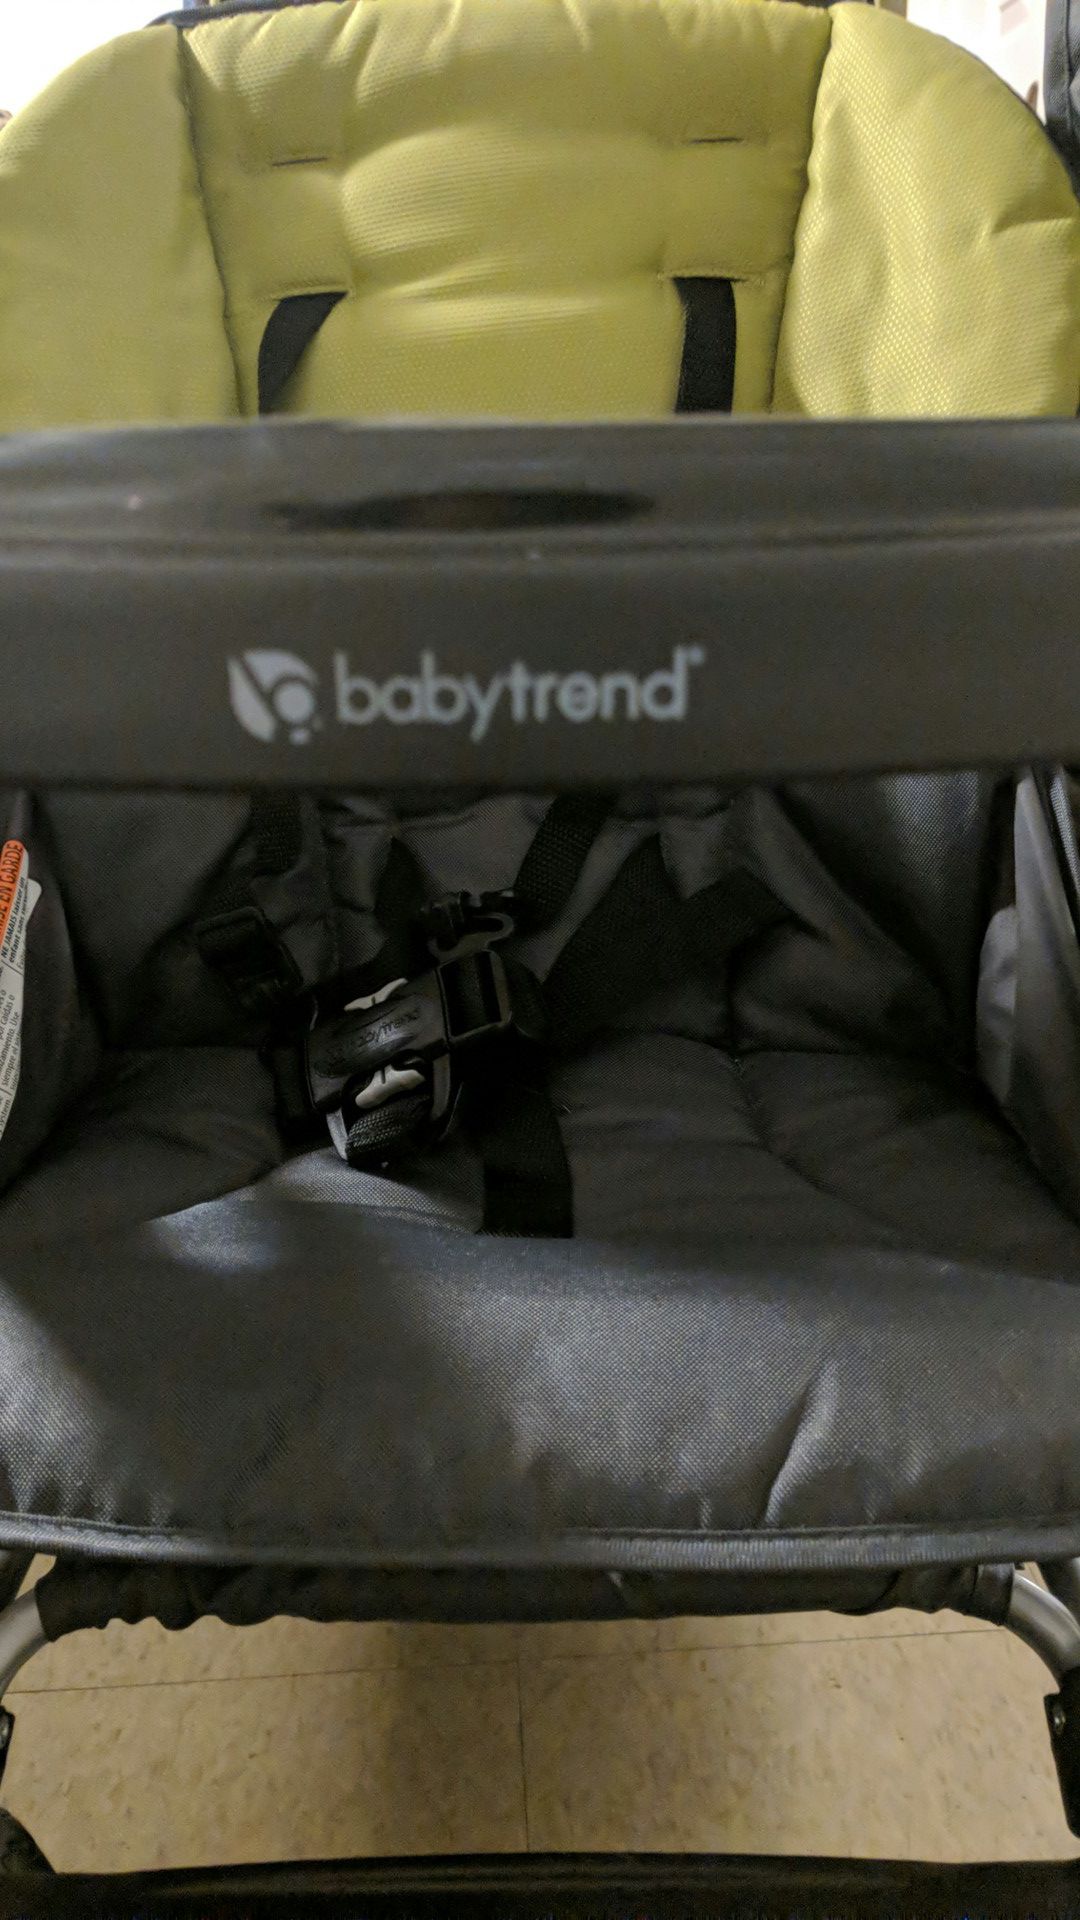 Double seated Stroller brand new